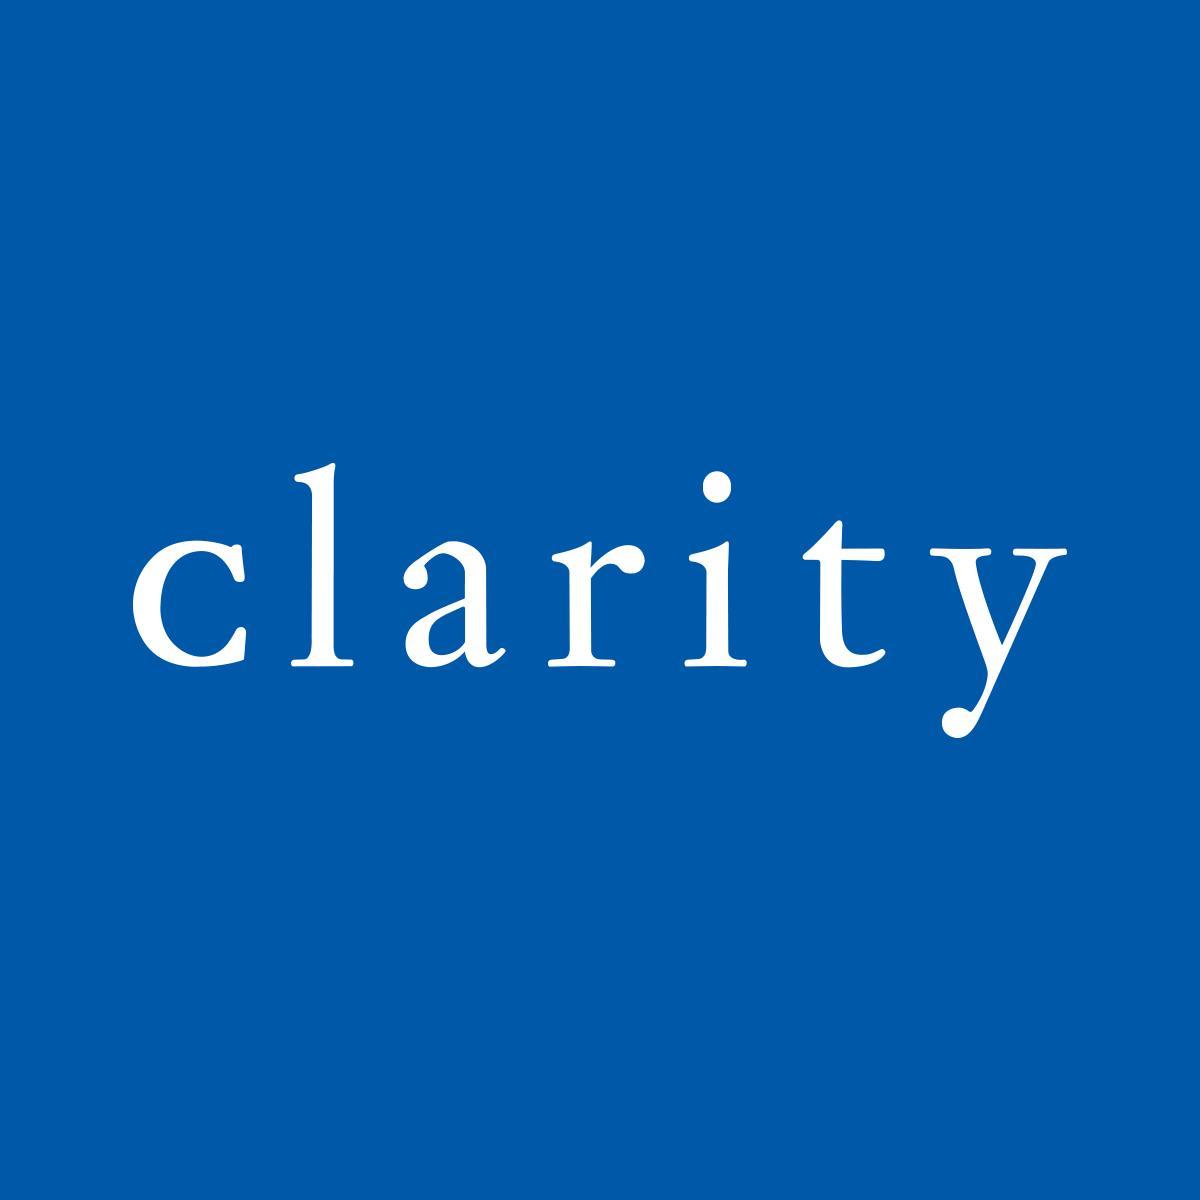 clarity is an award-winning firm of independent chartered financial planners, helping people plan and manage their wealth. Tweets are not advice.